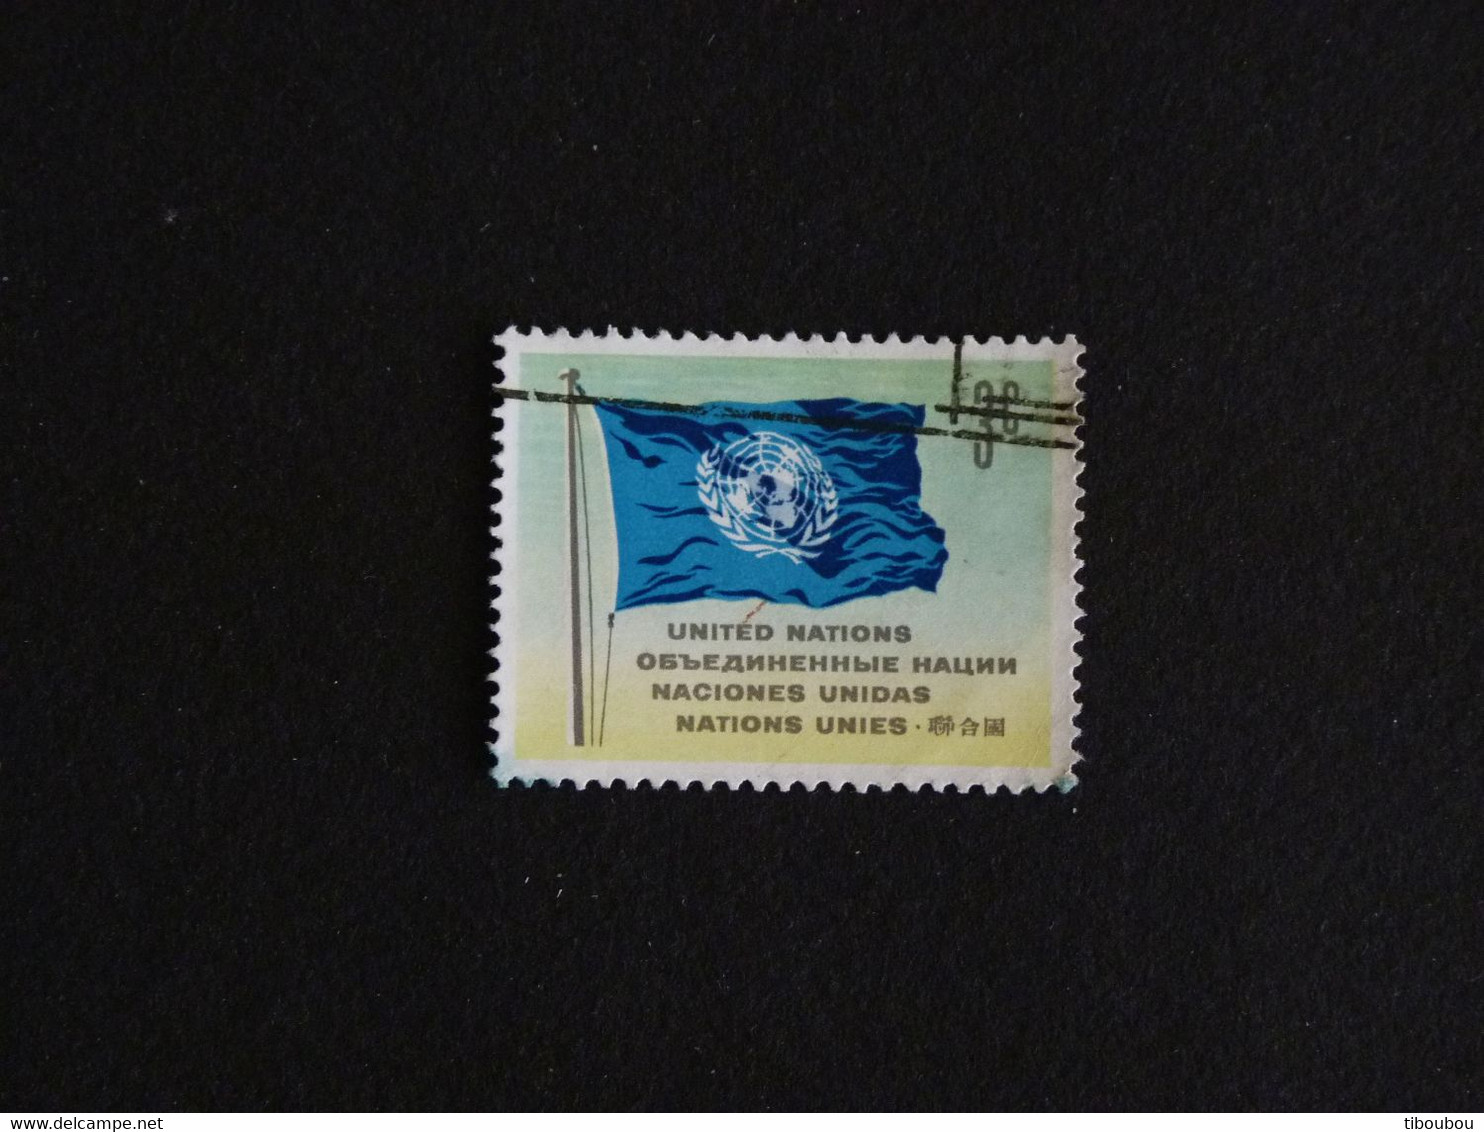 NATIONS UNIES UNITED NATIONS ONU NEW YORK YT 101 OBLITERE - DRAPEAU FLAG - Used Stamps